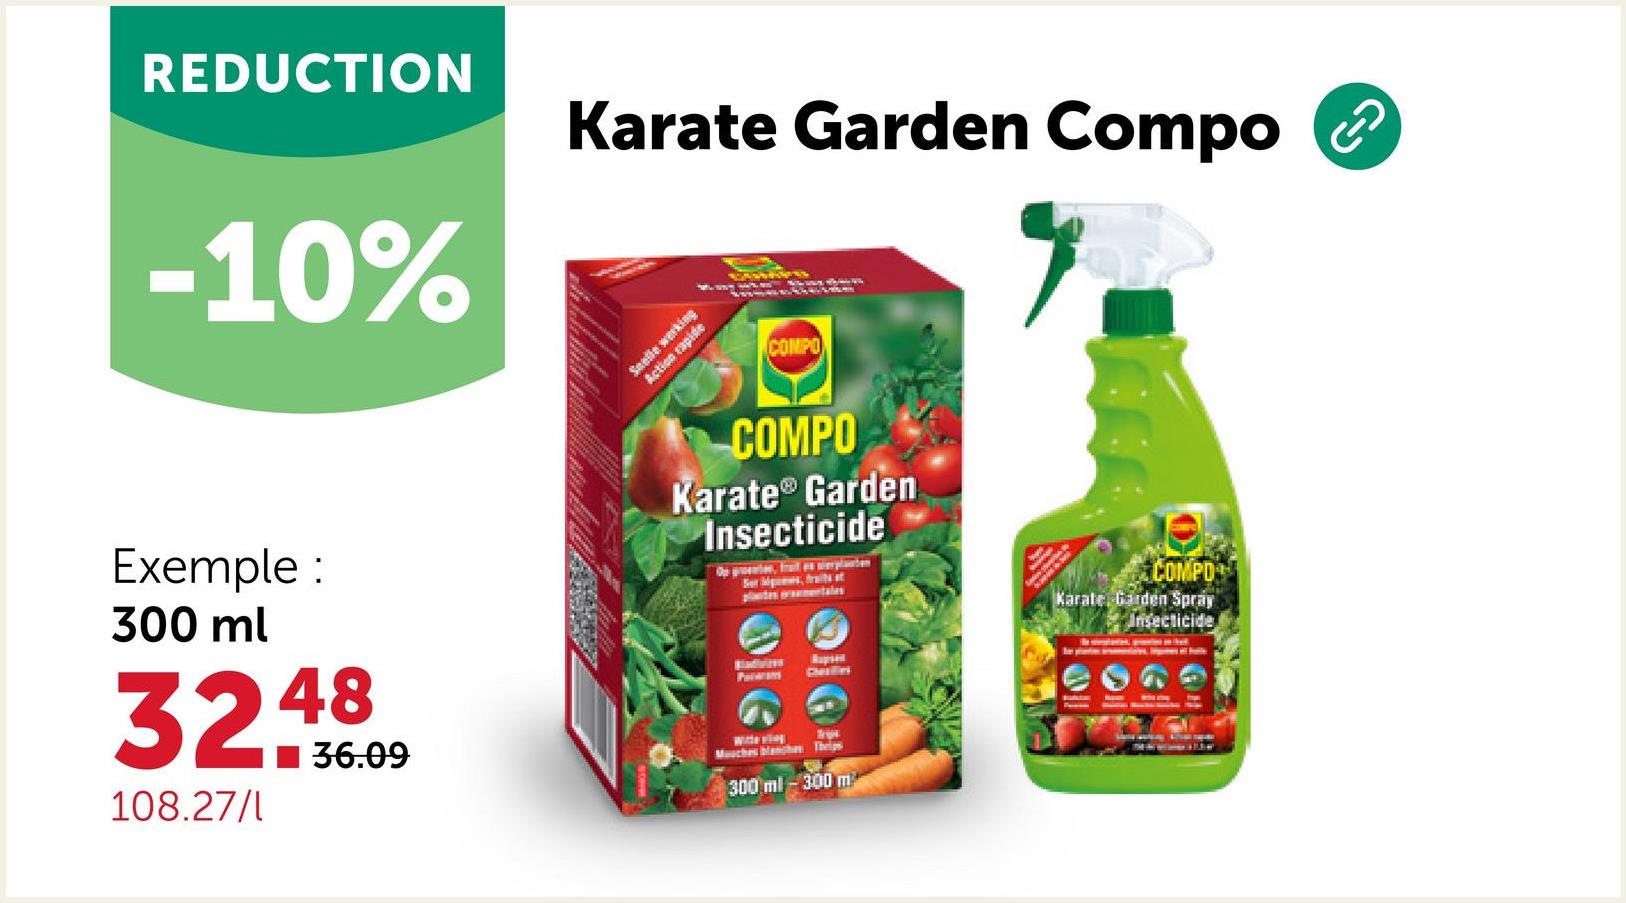 REDUCTION
-10%
Karate Garden Compo②
Seelle werking
Action rapide
COMPO
COMPO
Karate® Garden
Insecticide
Ser Mips, traits af
plates
tales
Exemple:
300 ml
32.4809
108.27/1
36.09
Pataram
Rupsen
Clealles
OIGHT
Witte ving
Tript
Mouches blanches Thrips
300 ml-300 m
વા
COMPO
Karate Garden Spray
Insecticide